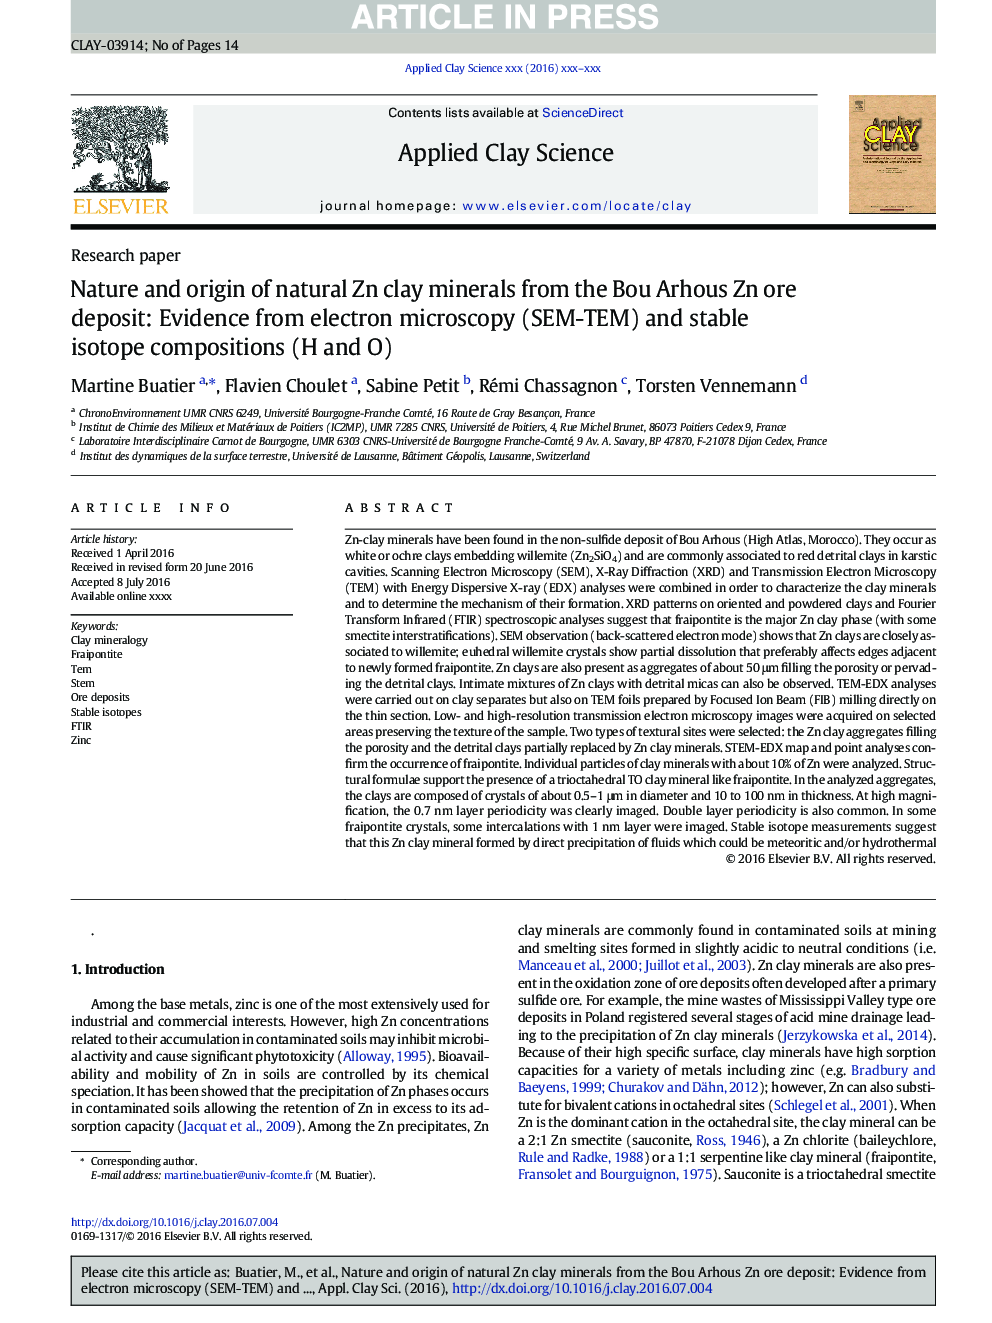 Nature and origin of natural Zn clay minerals from the Bou Arhous Zn ore deposit: Evidence from electron microscopy (SEM-TEM) and stable isotope compositions (H and O)